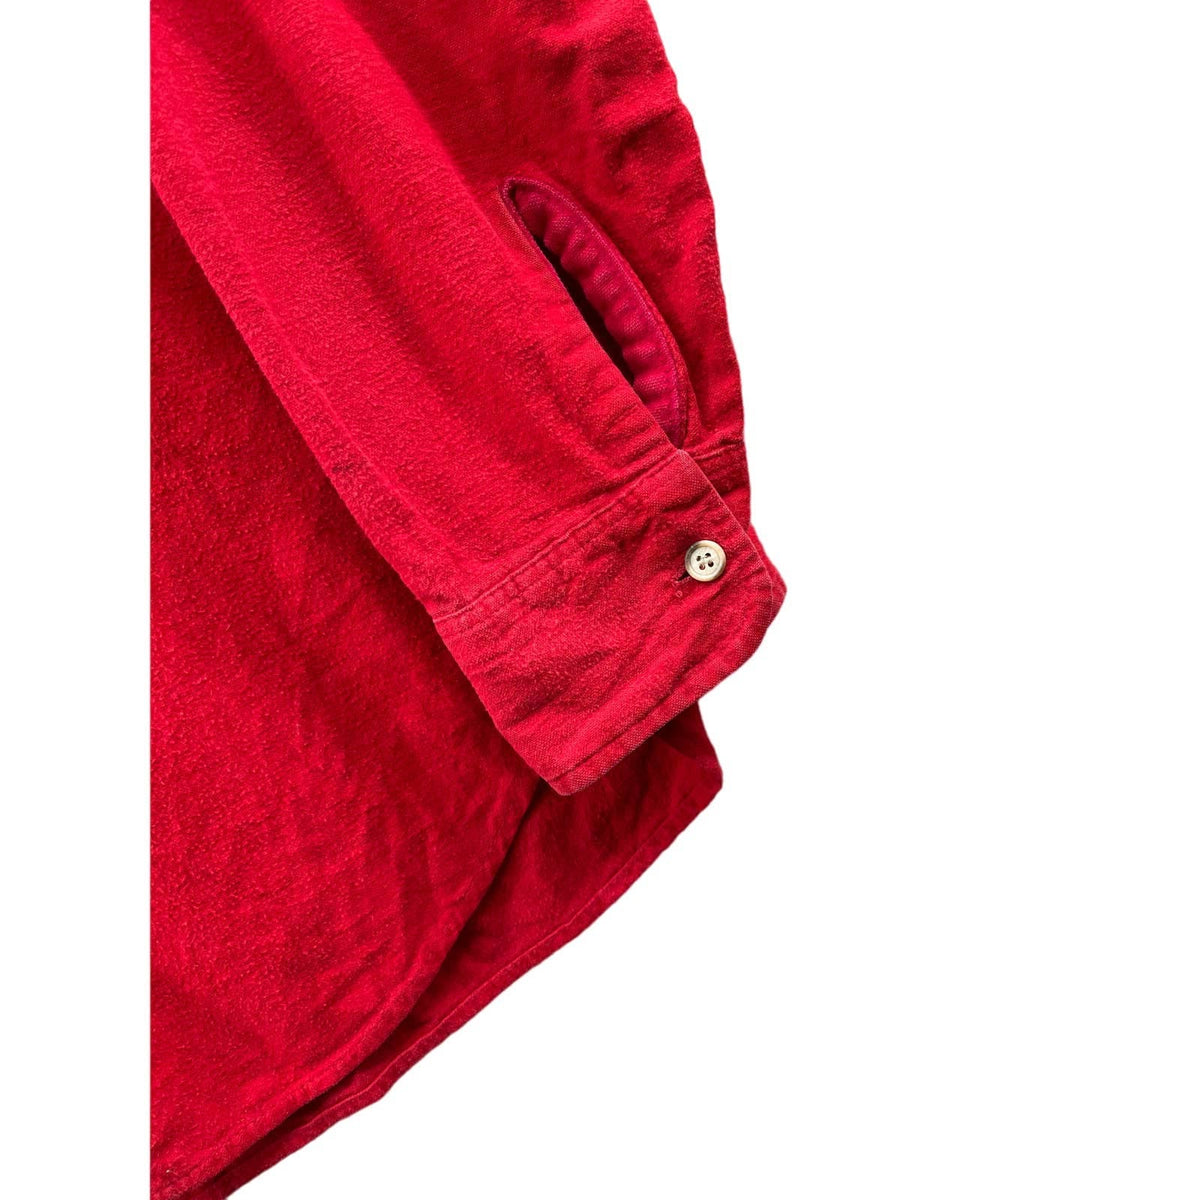 Vintage 1990's Woolrich Men's Red Chamois Button Up L/S Shirt